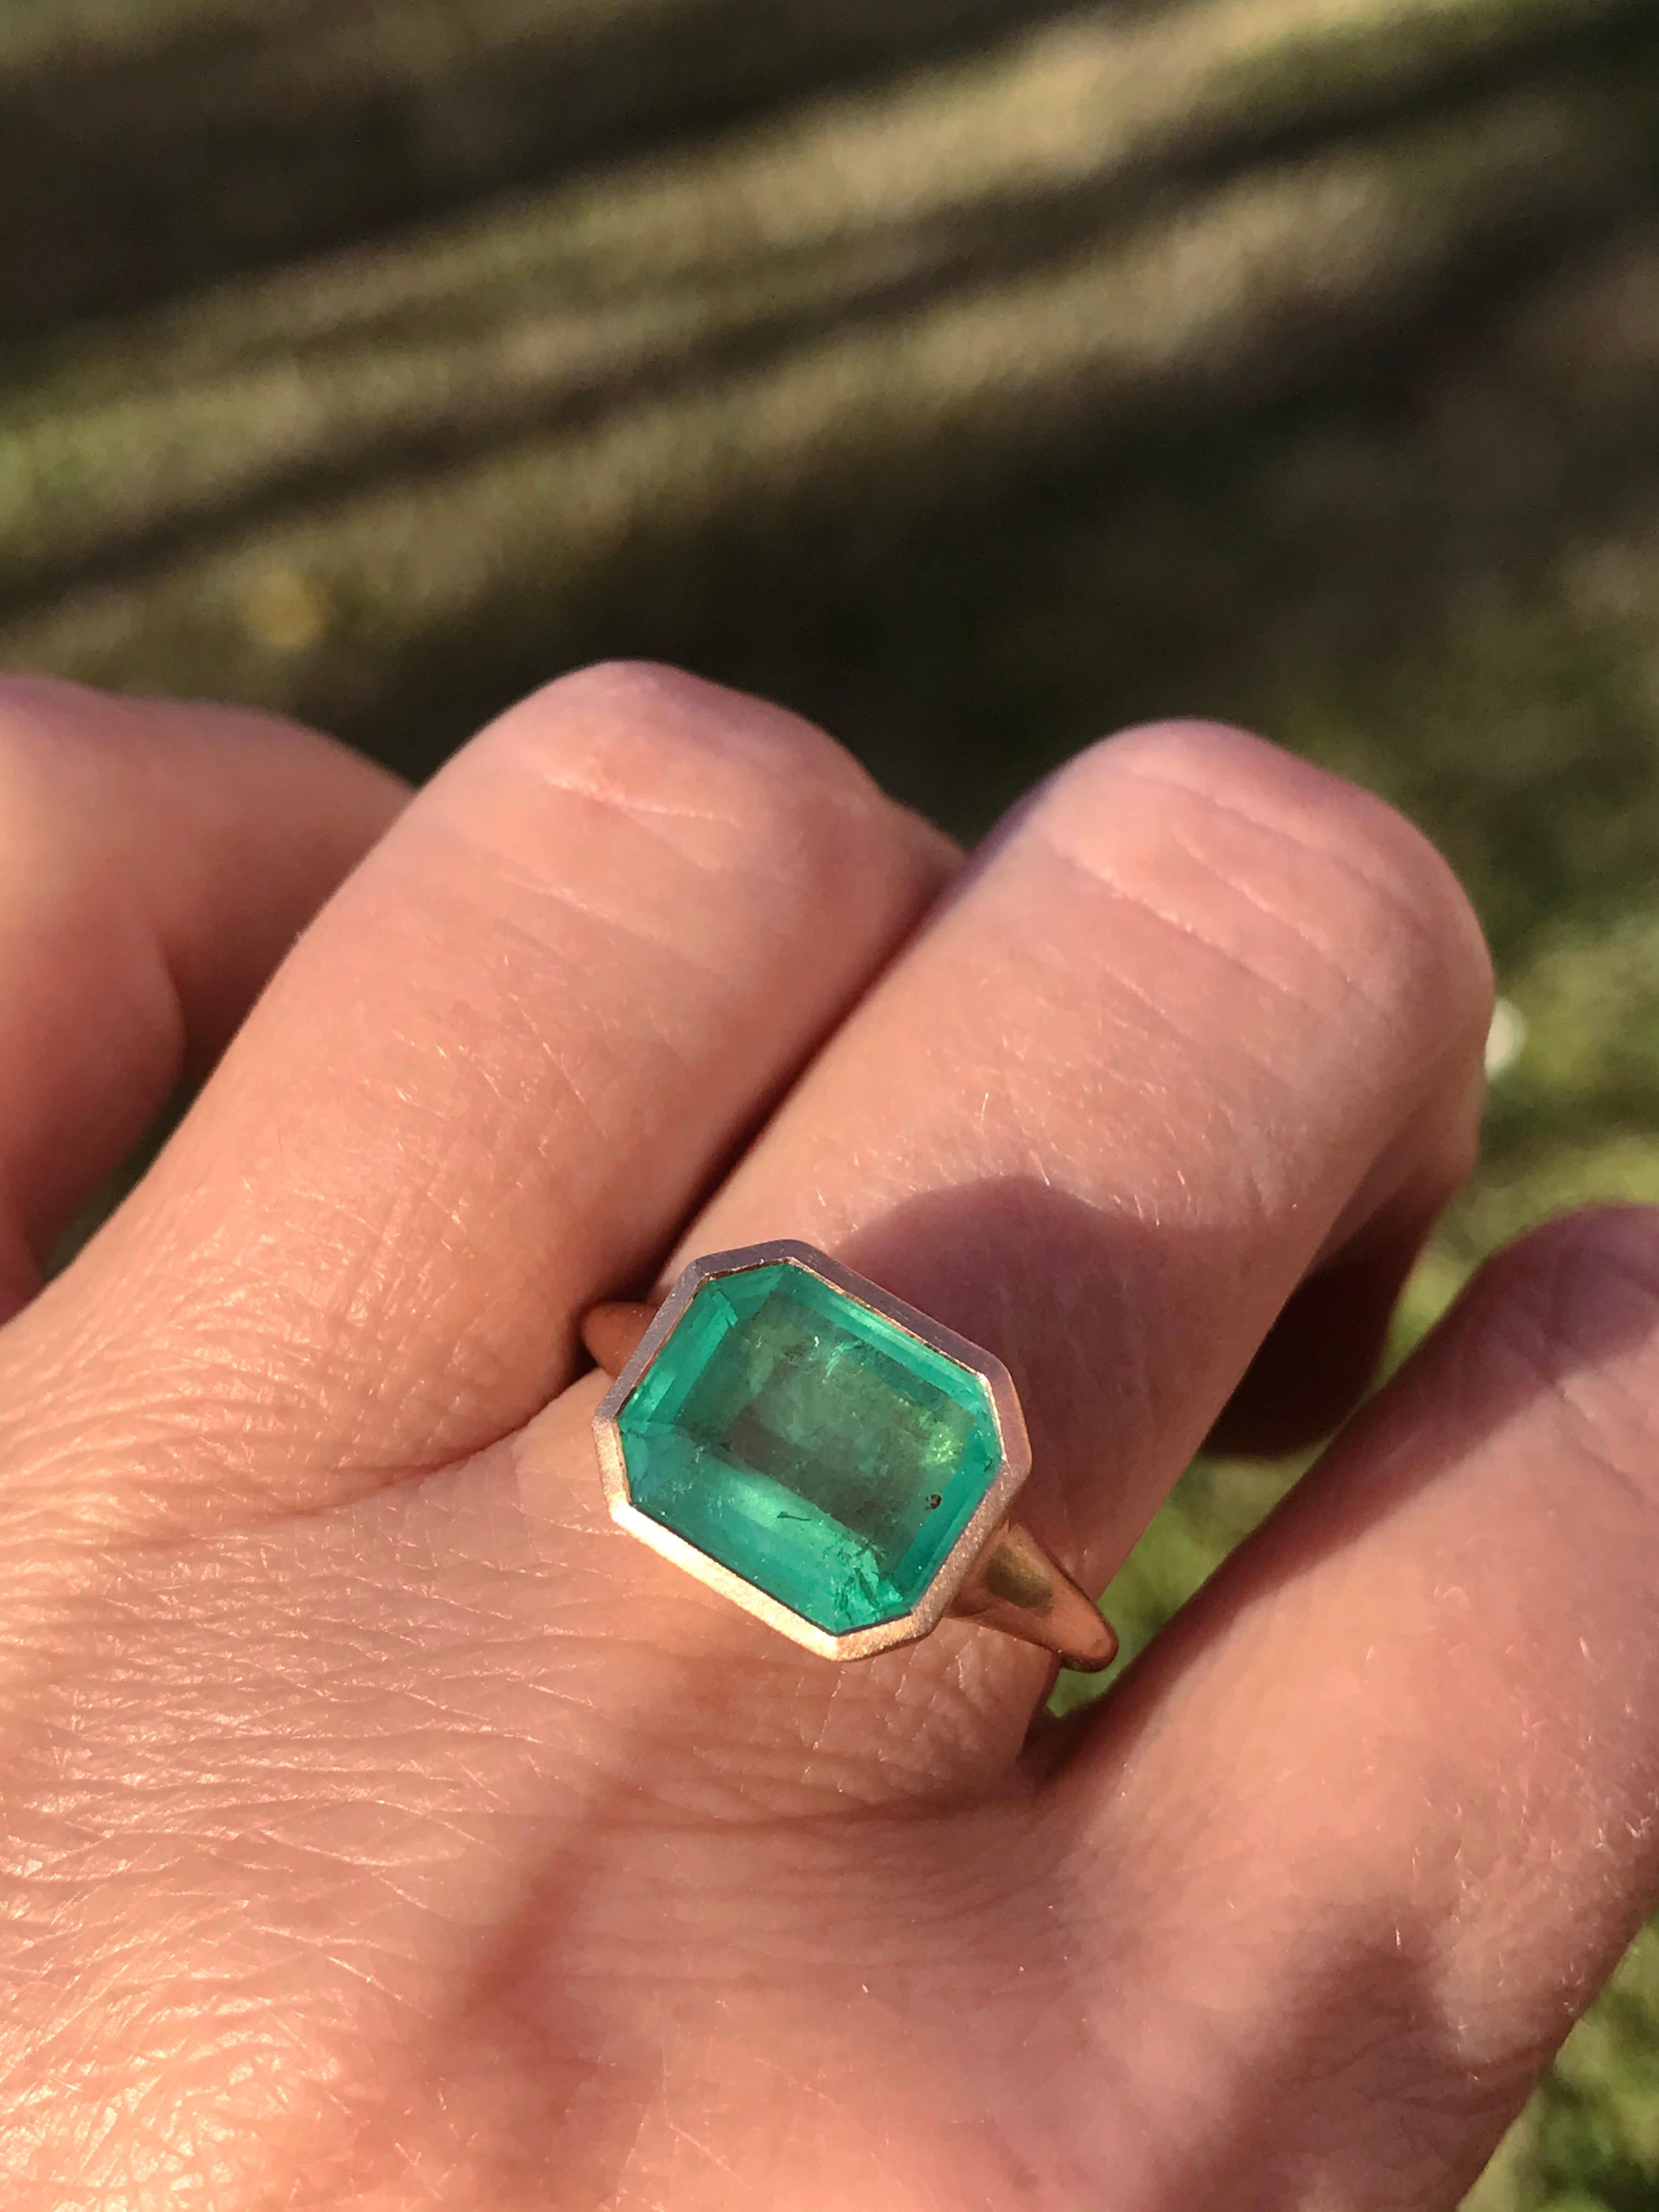 Dalben design One of a Kind 18k rose gold matte finishing ring with a 4,10 carat bezel-set emerald cut emerald. 
Ring size 7 1/4 USA - EU 55 re-sizable to most finger sizes. 
Bezel stone dimensions :
height 10,1 mm
width 12 mm
The ring has been